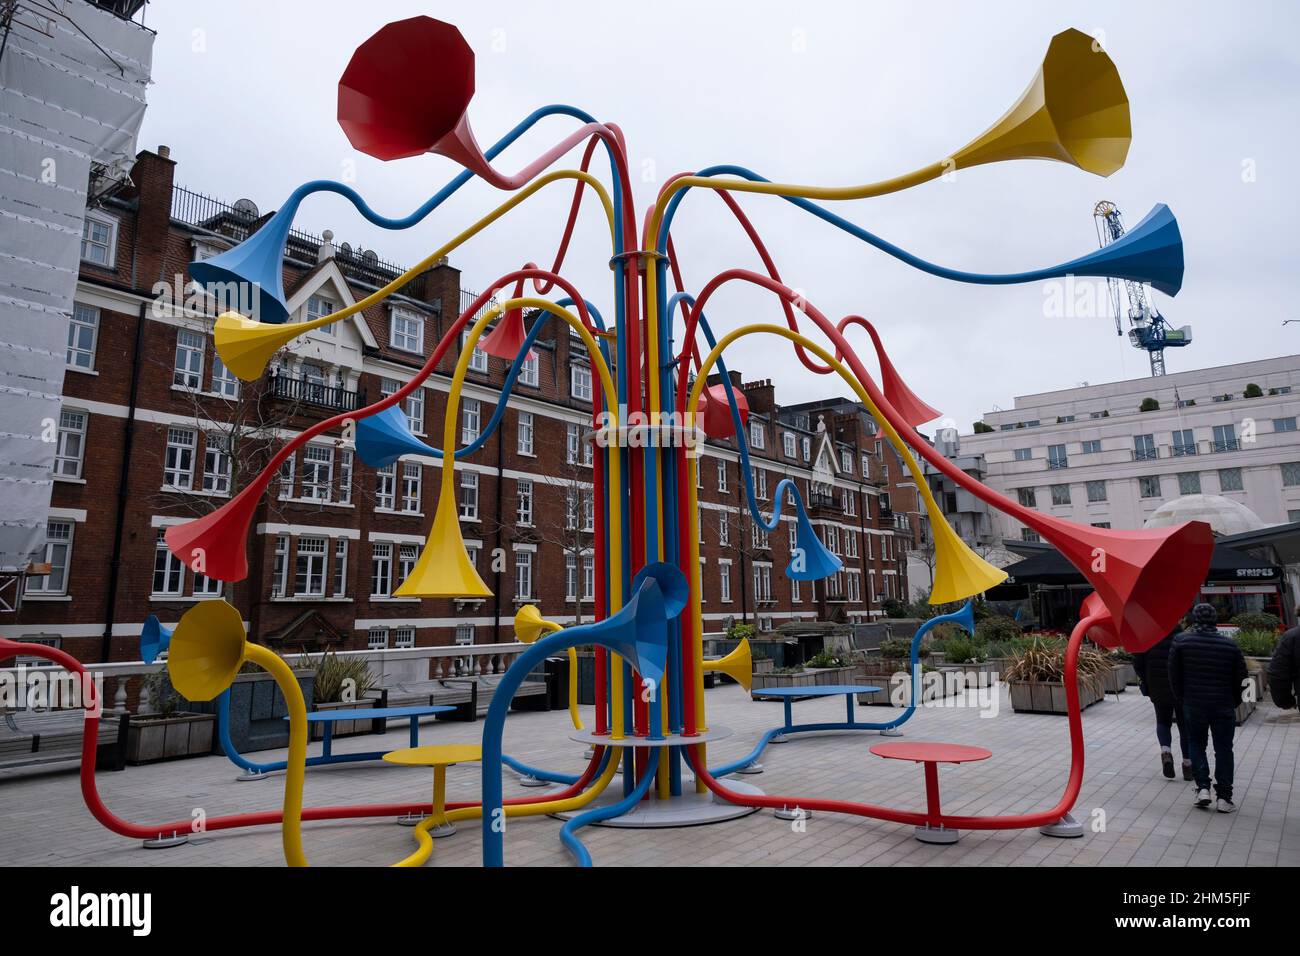 Interactive artwork Sonic Boom by Yuri Suzuki installed in public in central London on 21st January 2022 in London, United Kingdom. Yuri Suzuki is a Japanese artist, designer, and musician. Primarily known for the design of sound-based objects, Suzuki is a partner of the London office of Pentagram. Stock Photo